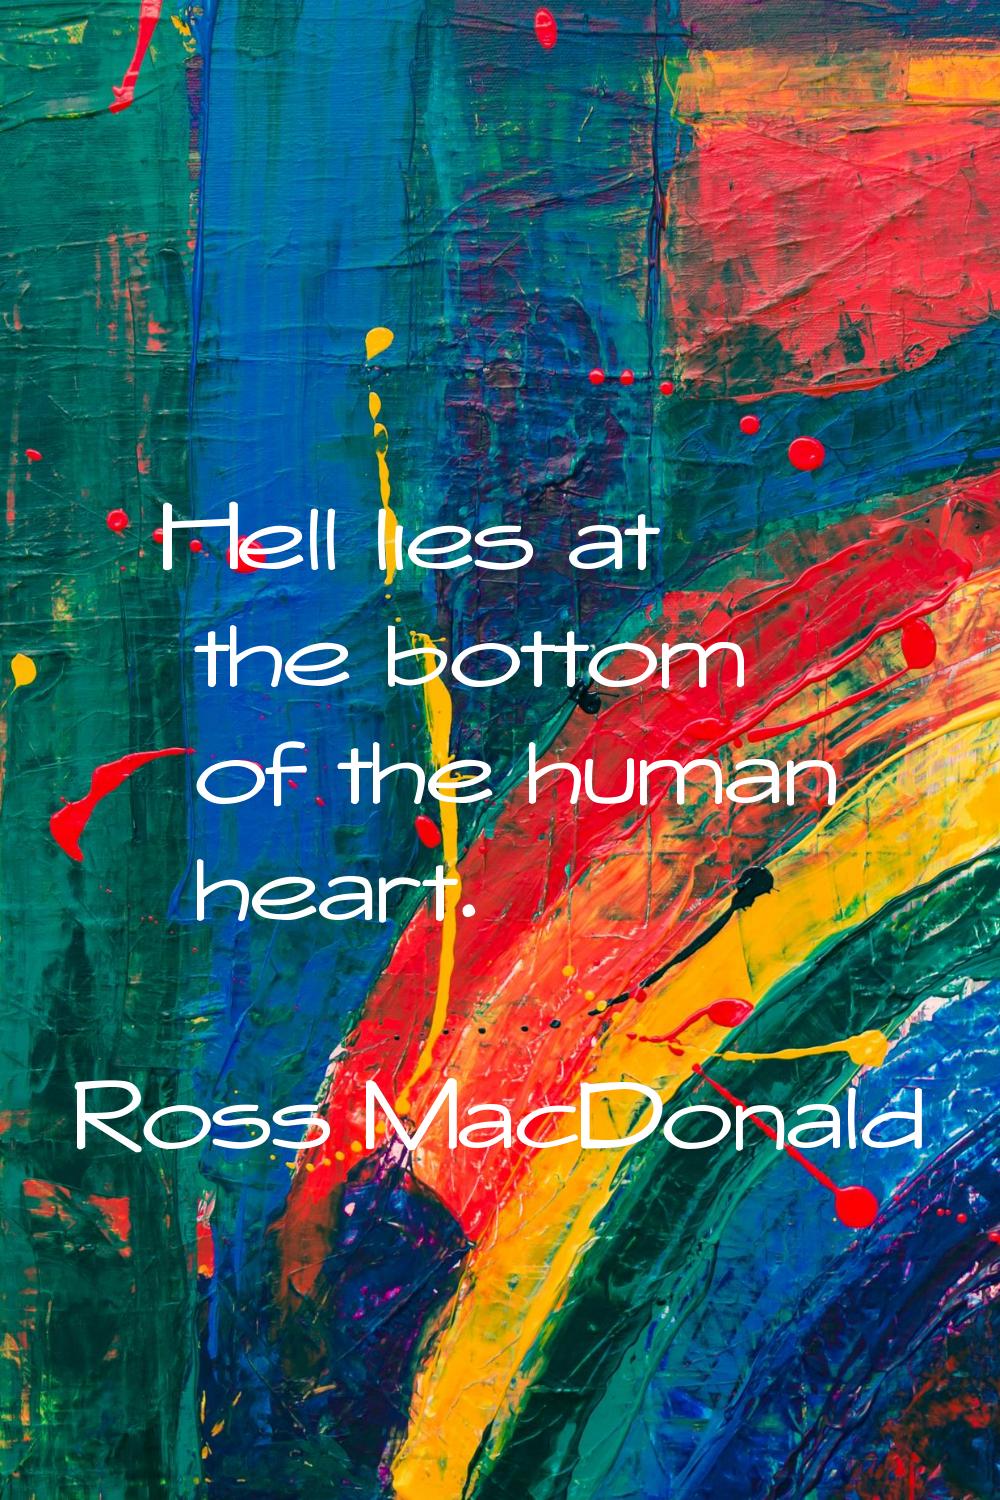 Hell lies at the bottom of the human heart.